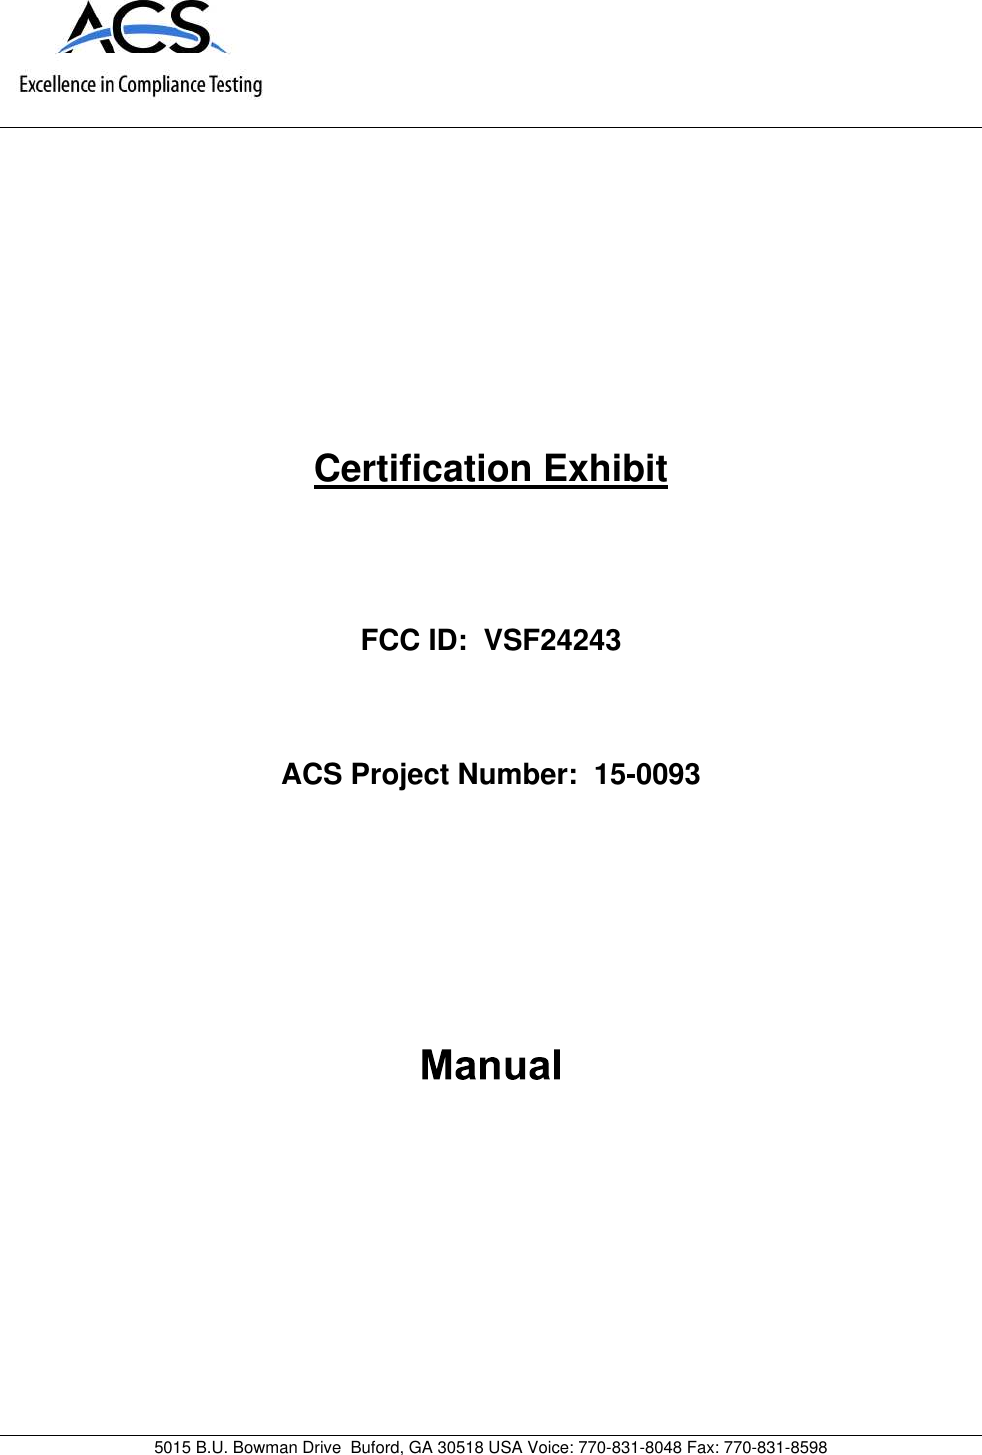 5015 B.U. Bowman Drive Buford, GA 30518 USA Voice: 770-831-8048 Fax: 770-831-8598Certification ExhibitFCC ID: VSF24243ACS Project Number: 15-0093